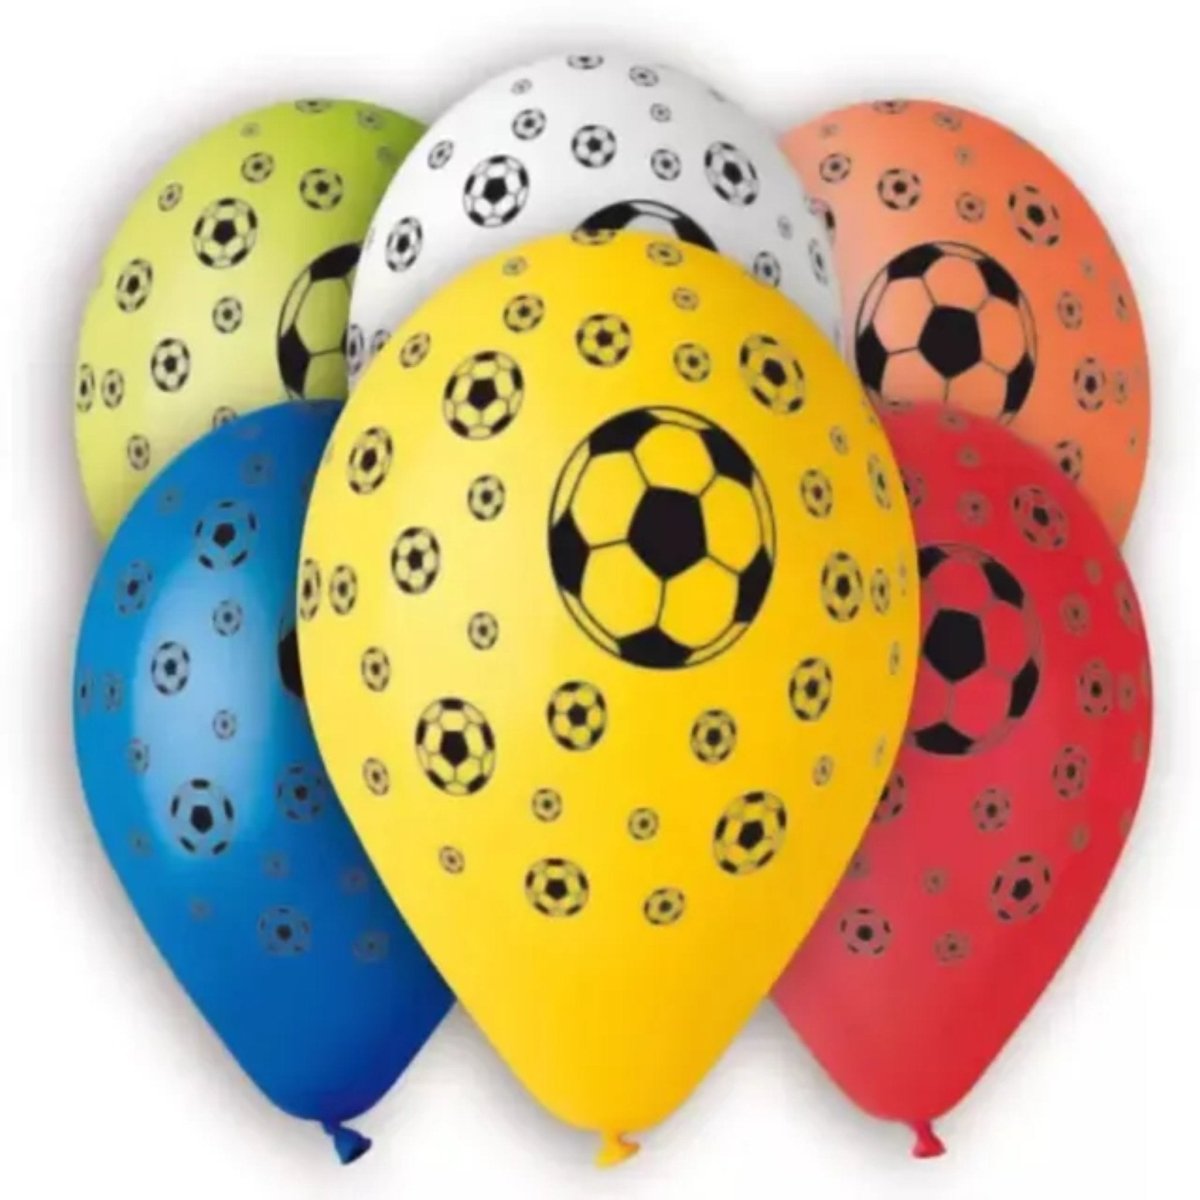 Football Print Balloons 10pc - Kids Party Craft